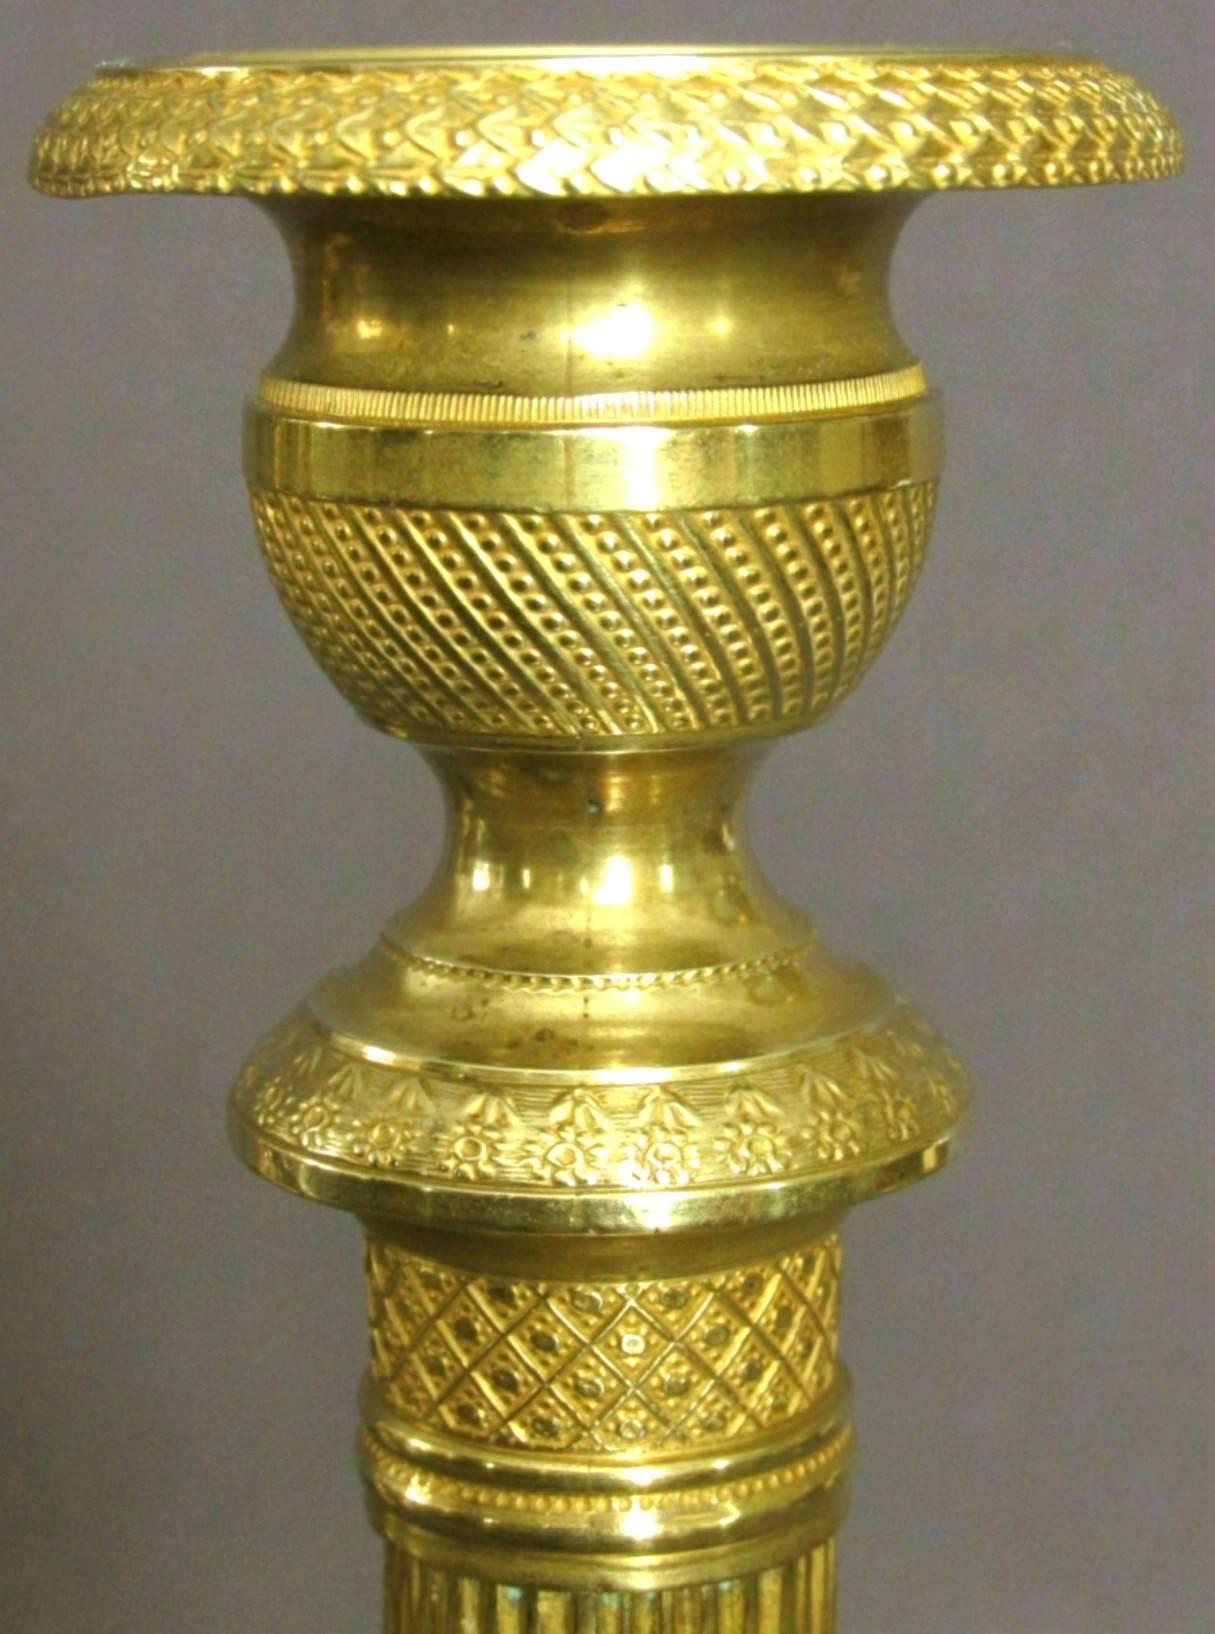 Both candlesticks showing reeded columns with finely milled capitals and urn-shaped nozzles with detachable drip pans, rising from circular bases decorated with milled geometric motifs. The underside of each base bearing faintly stencilled inventory